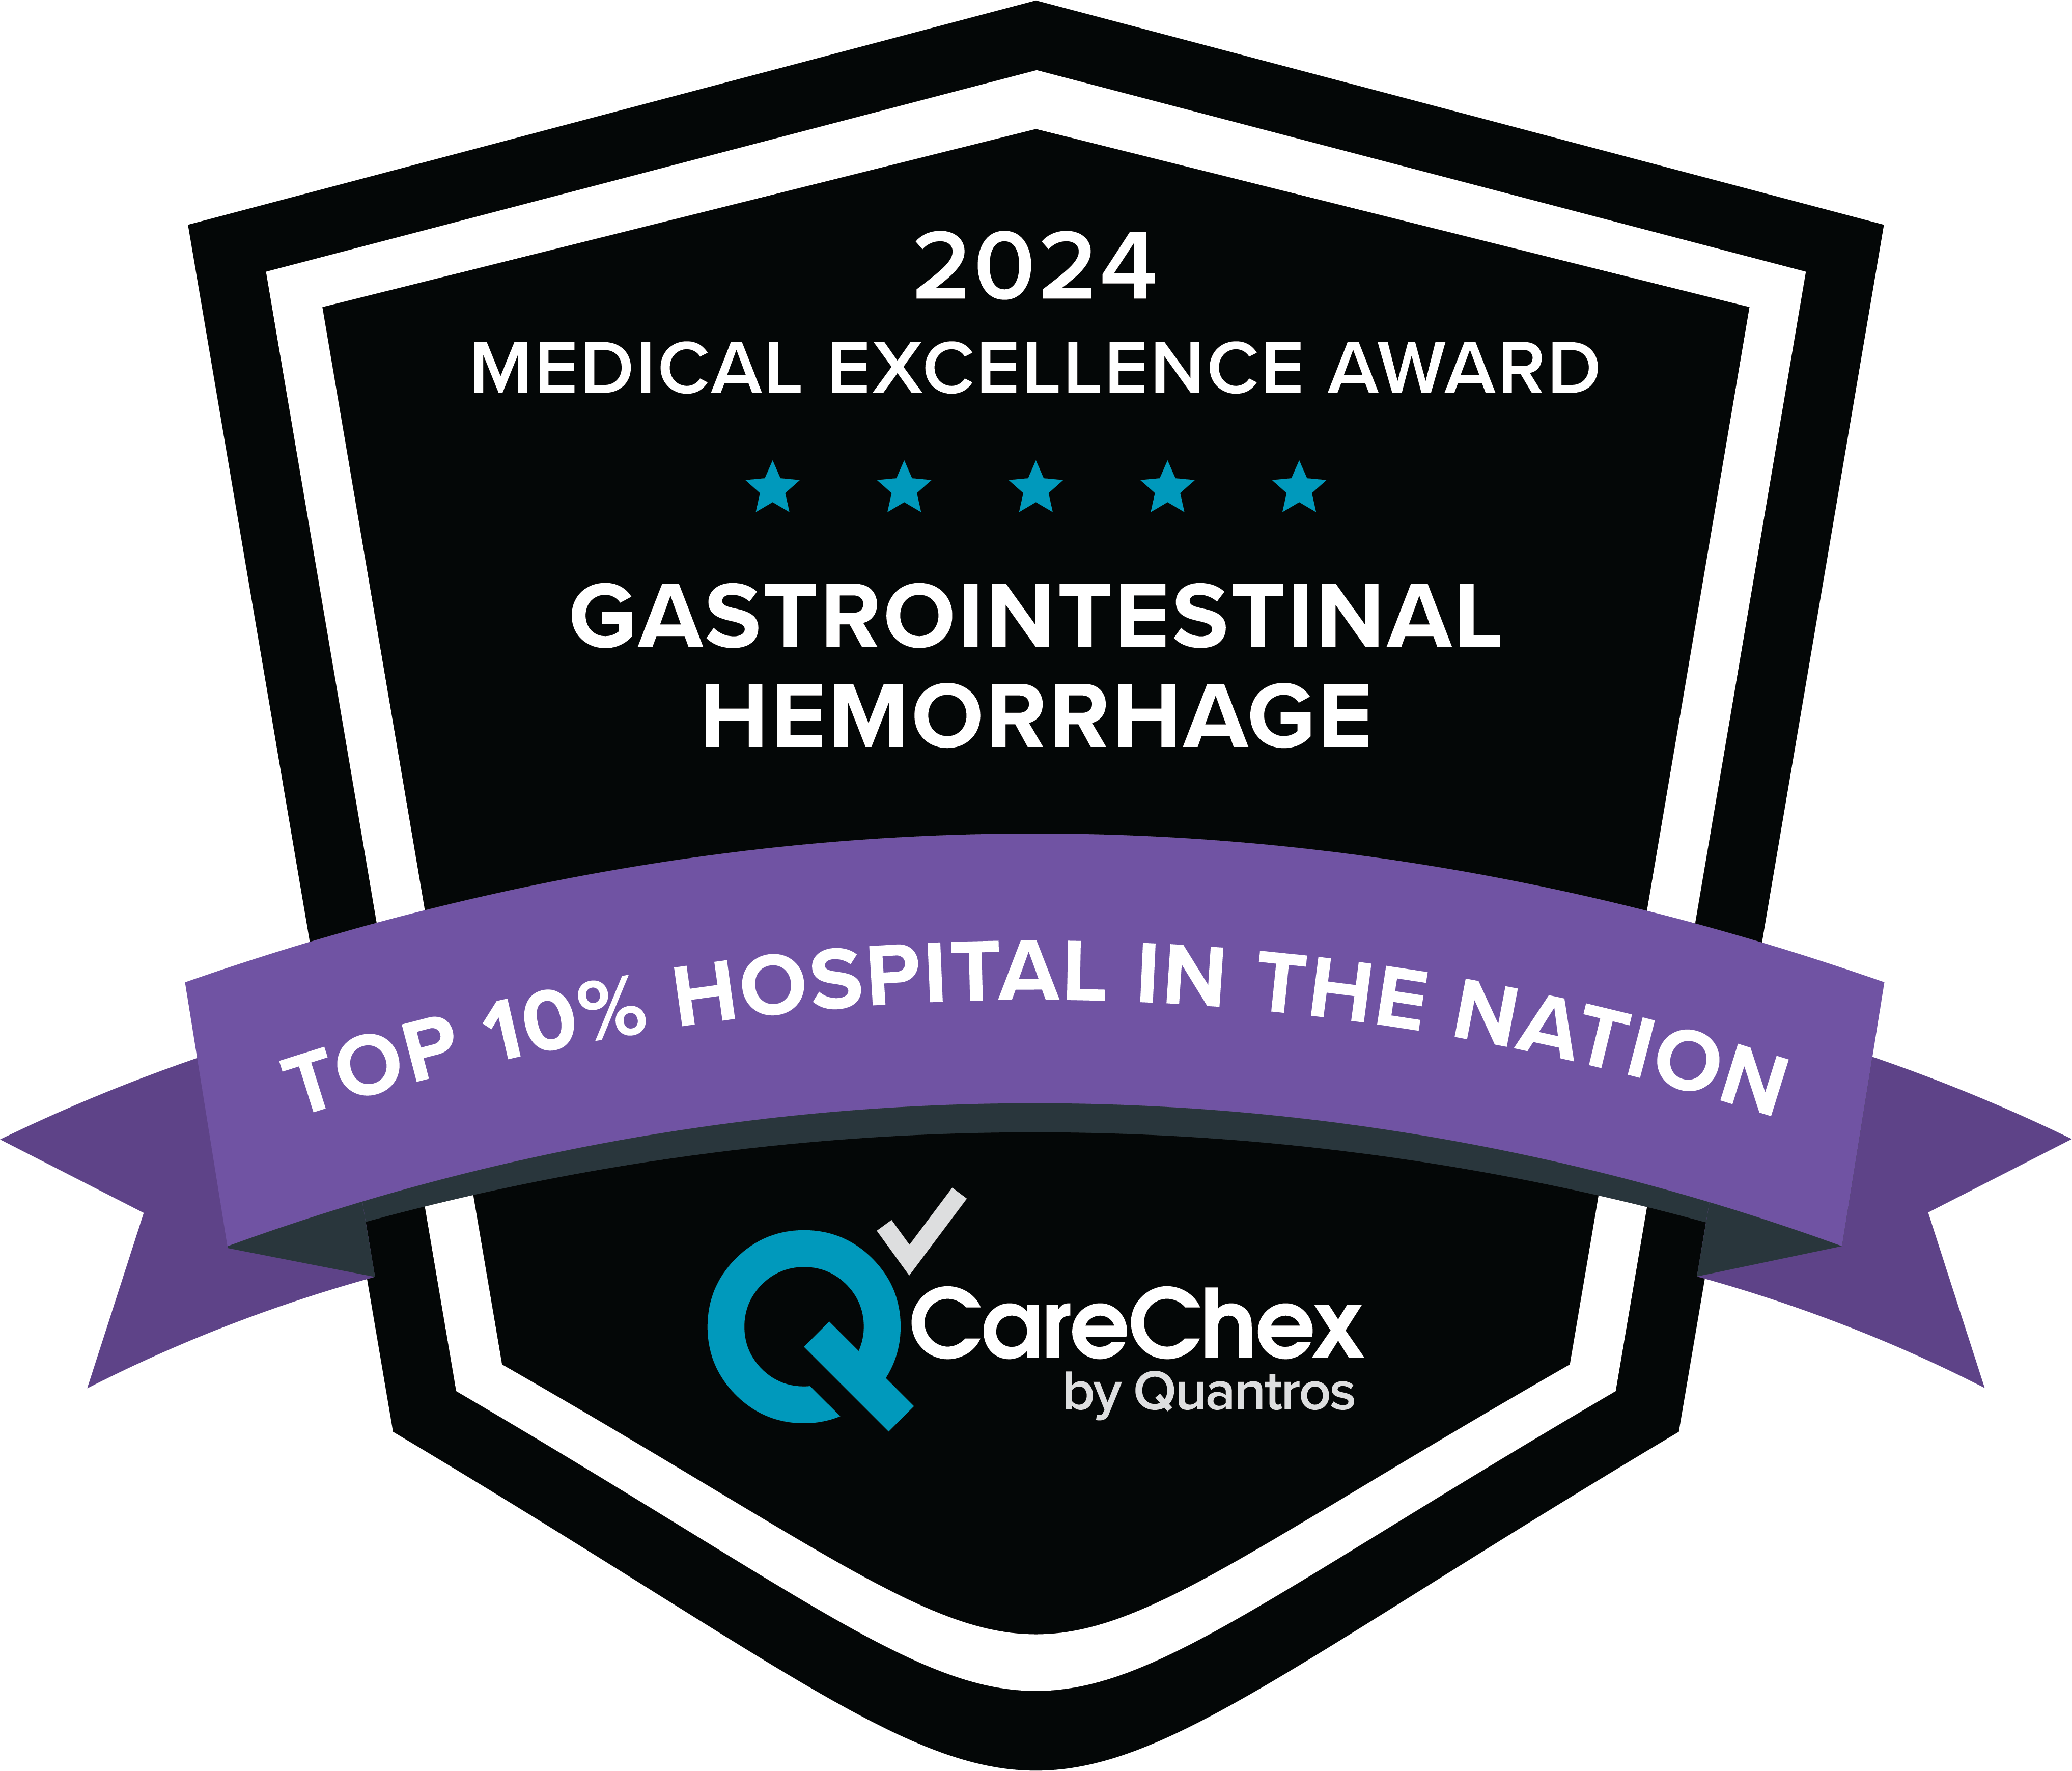 Awards badge for Top 10% Hospital in the Nation for Medical Excellence in Gastrointestinal Hemorrhage – 2024 CareChex by Quantros